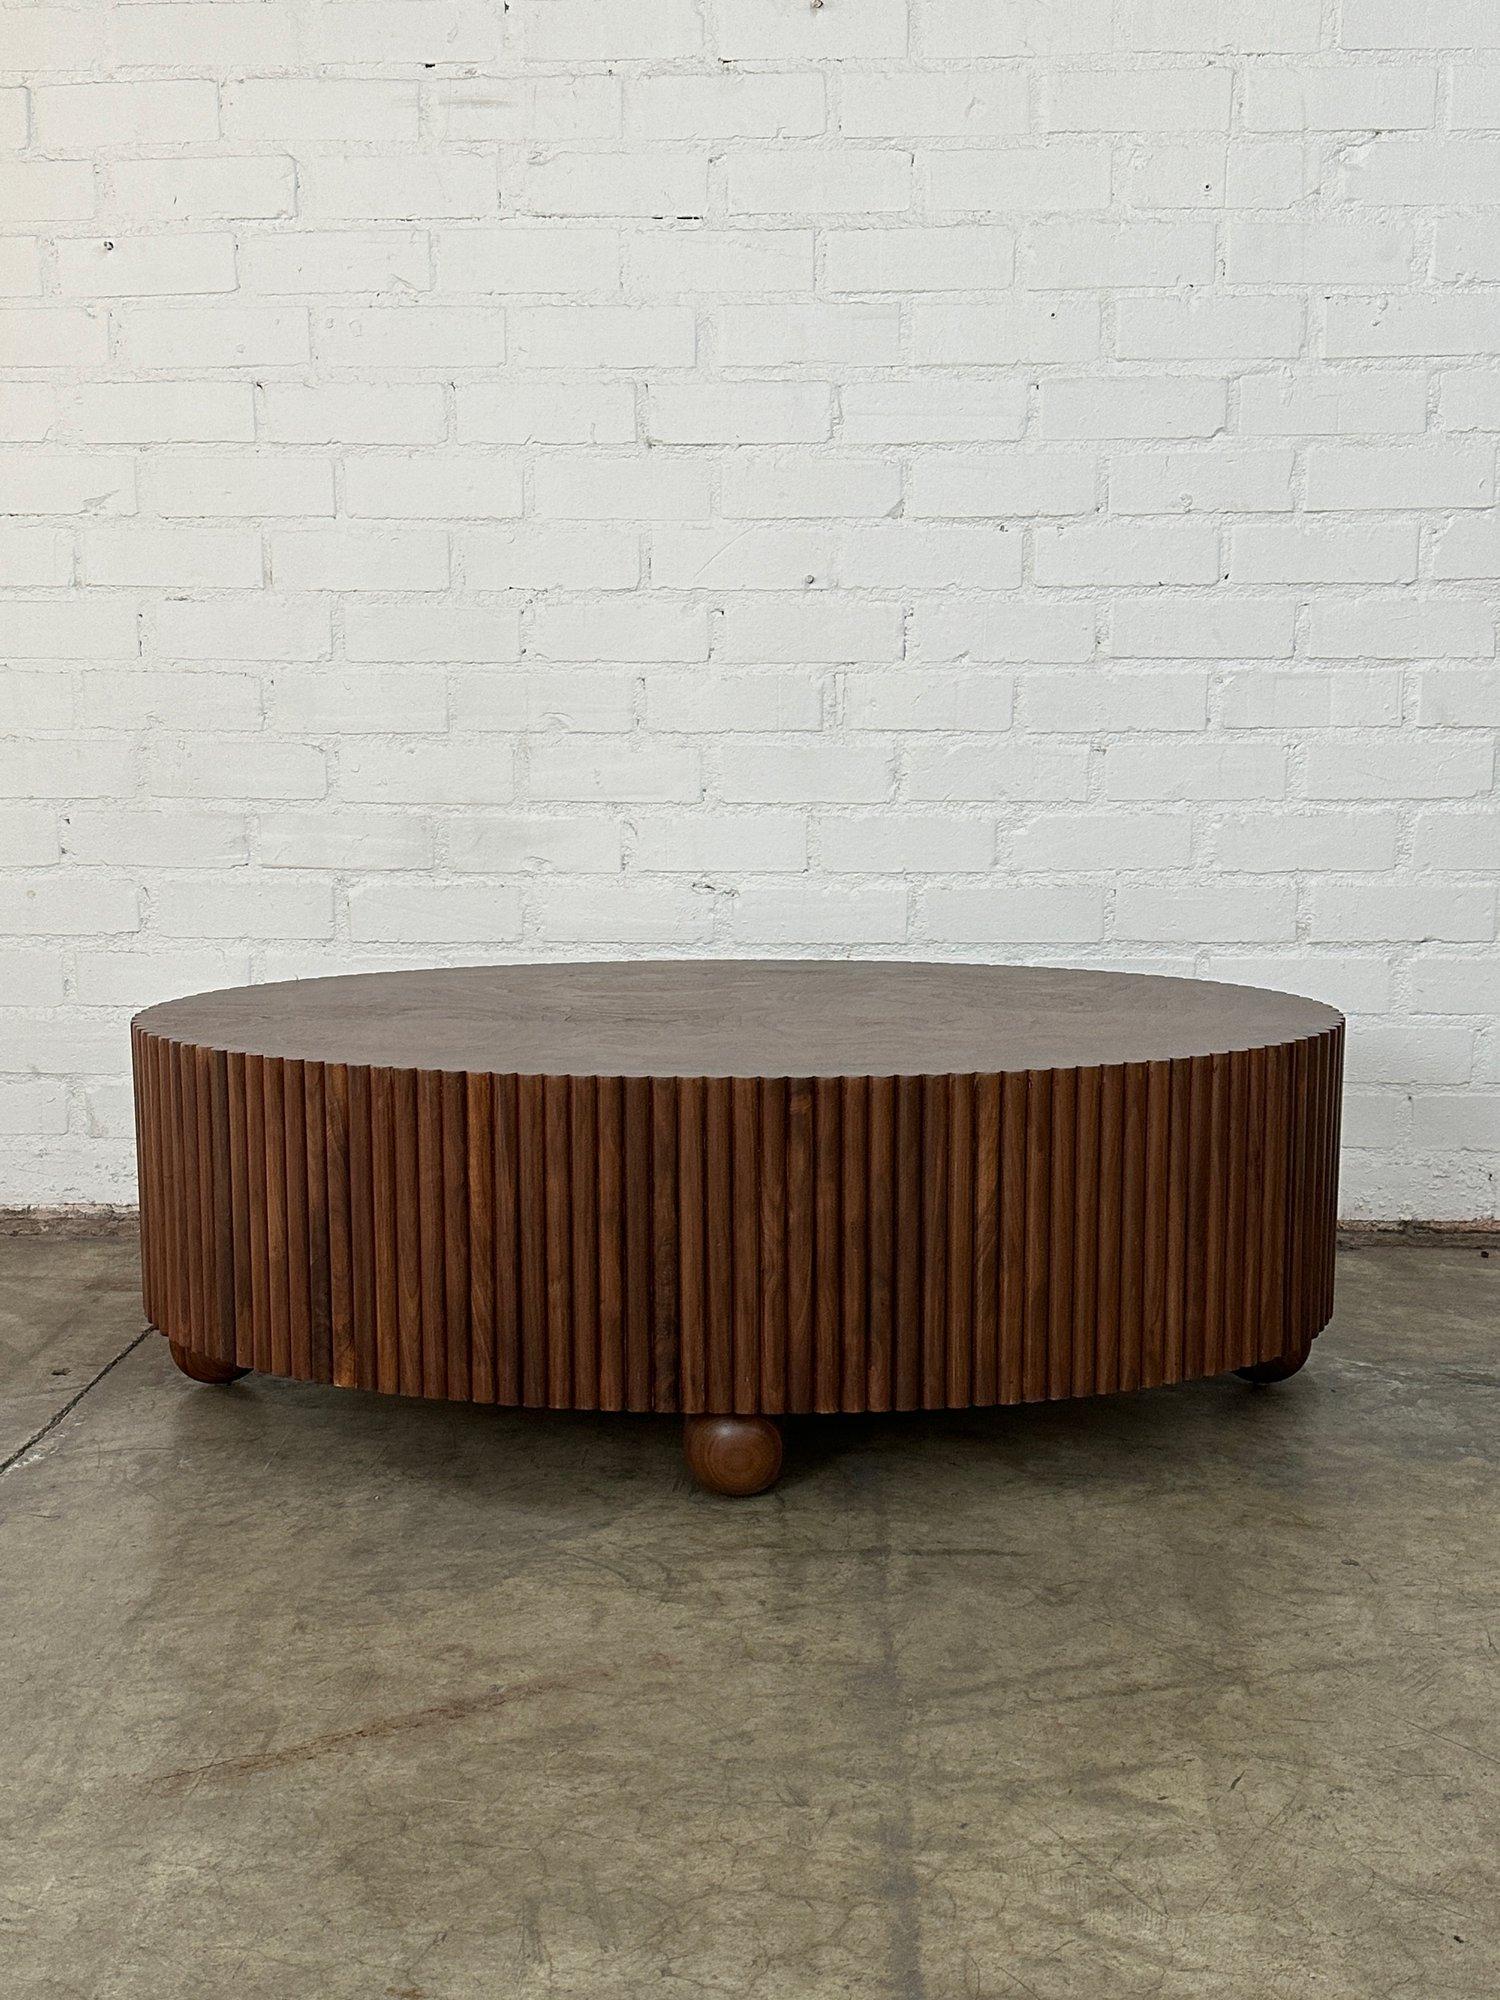 Art Deco Walnut Burl Coffee Table - One of One For Sale